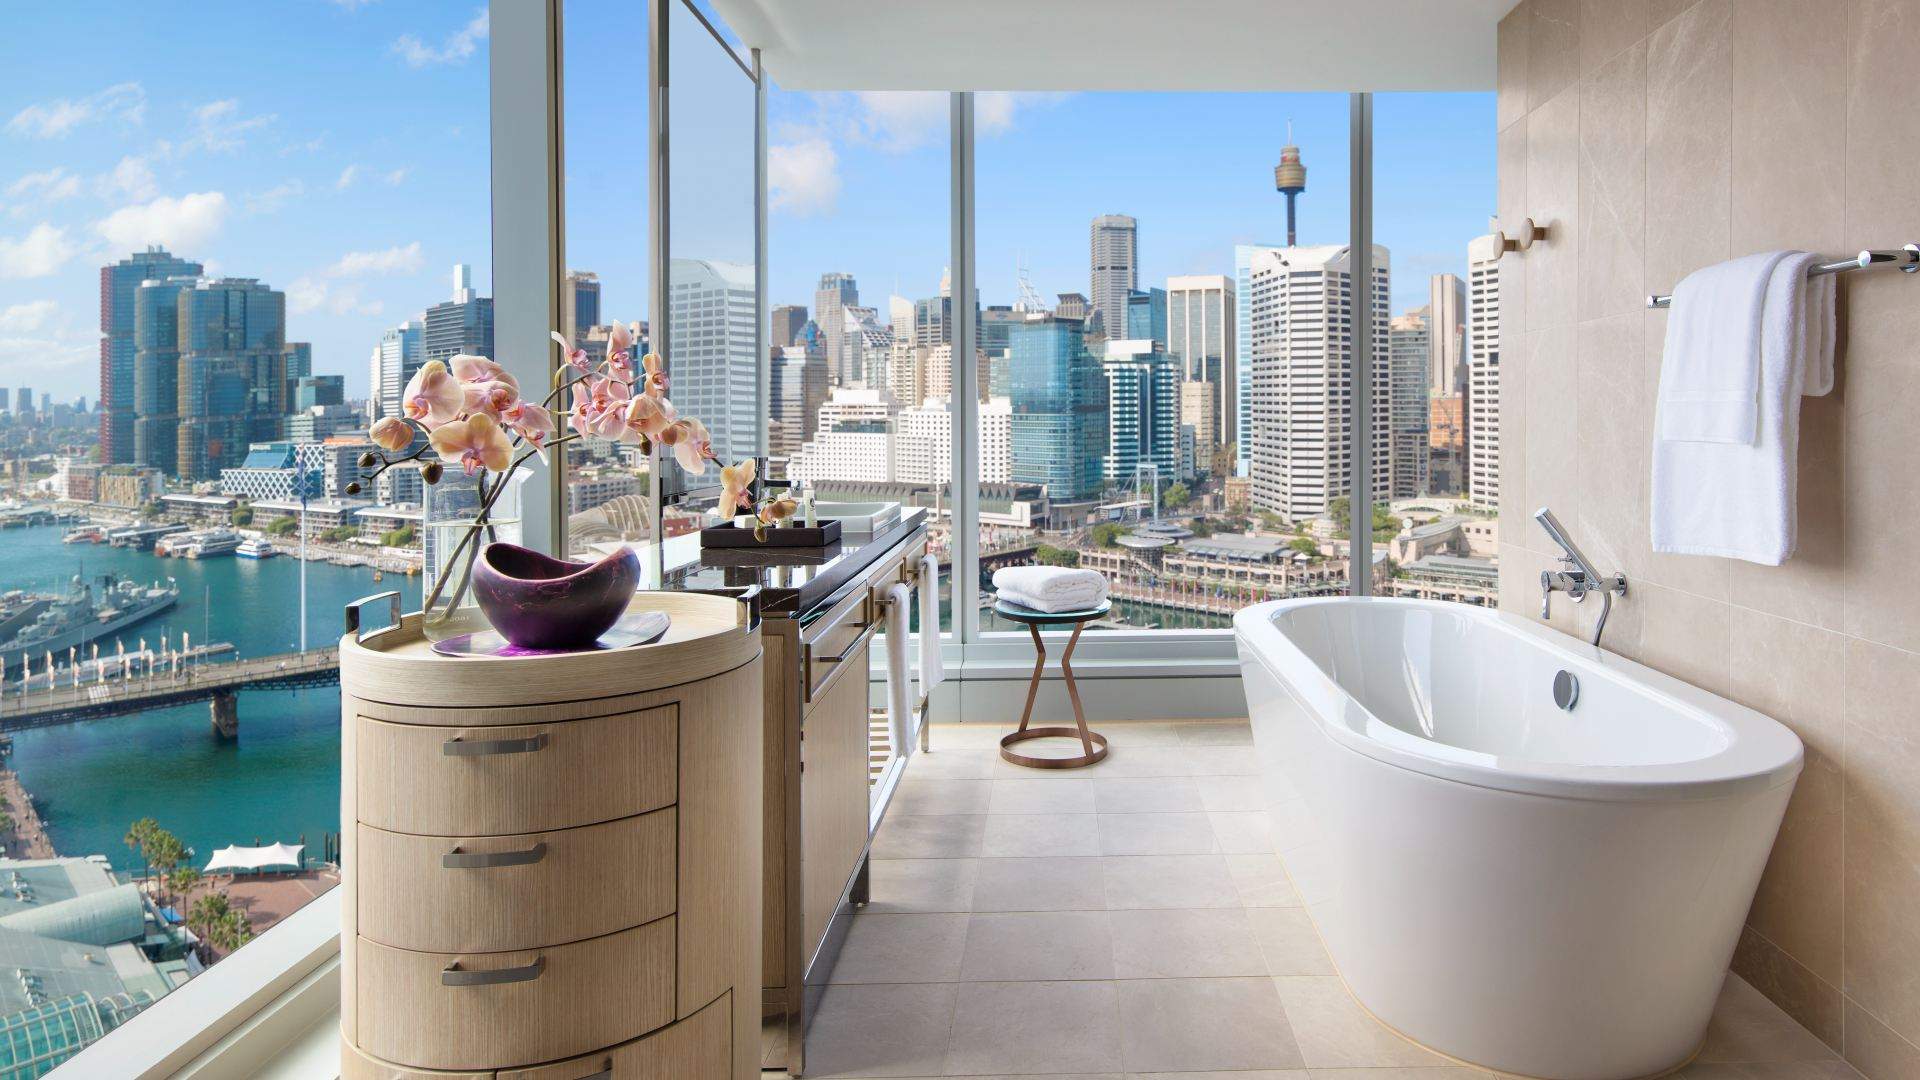 Sofitel SPA Darling Harbour - one of the best spas in Sydney